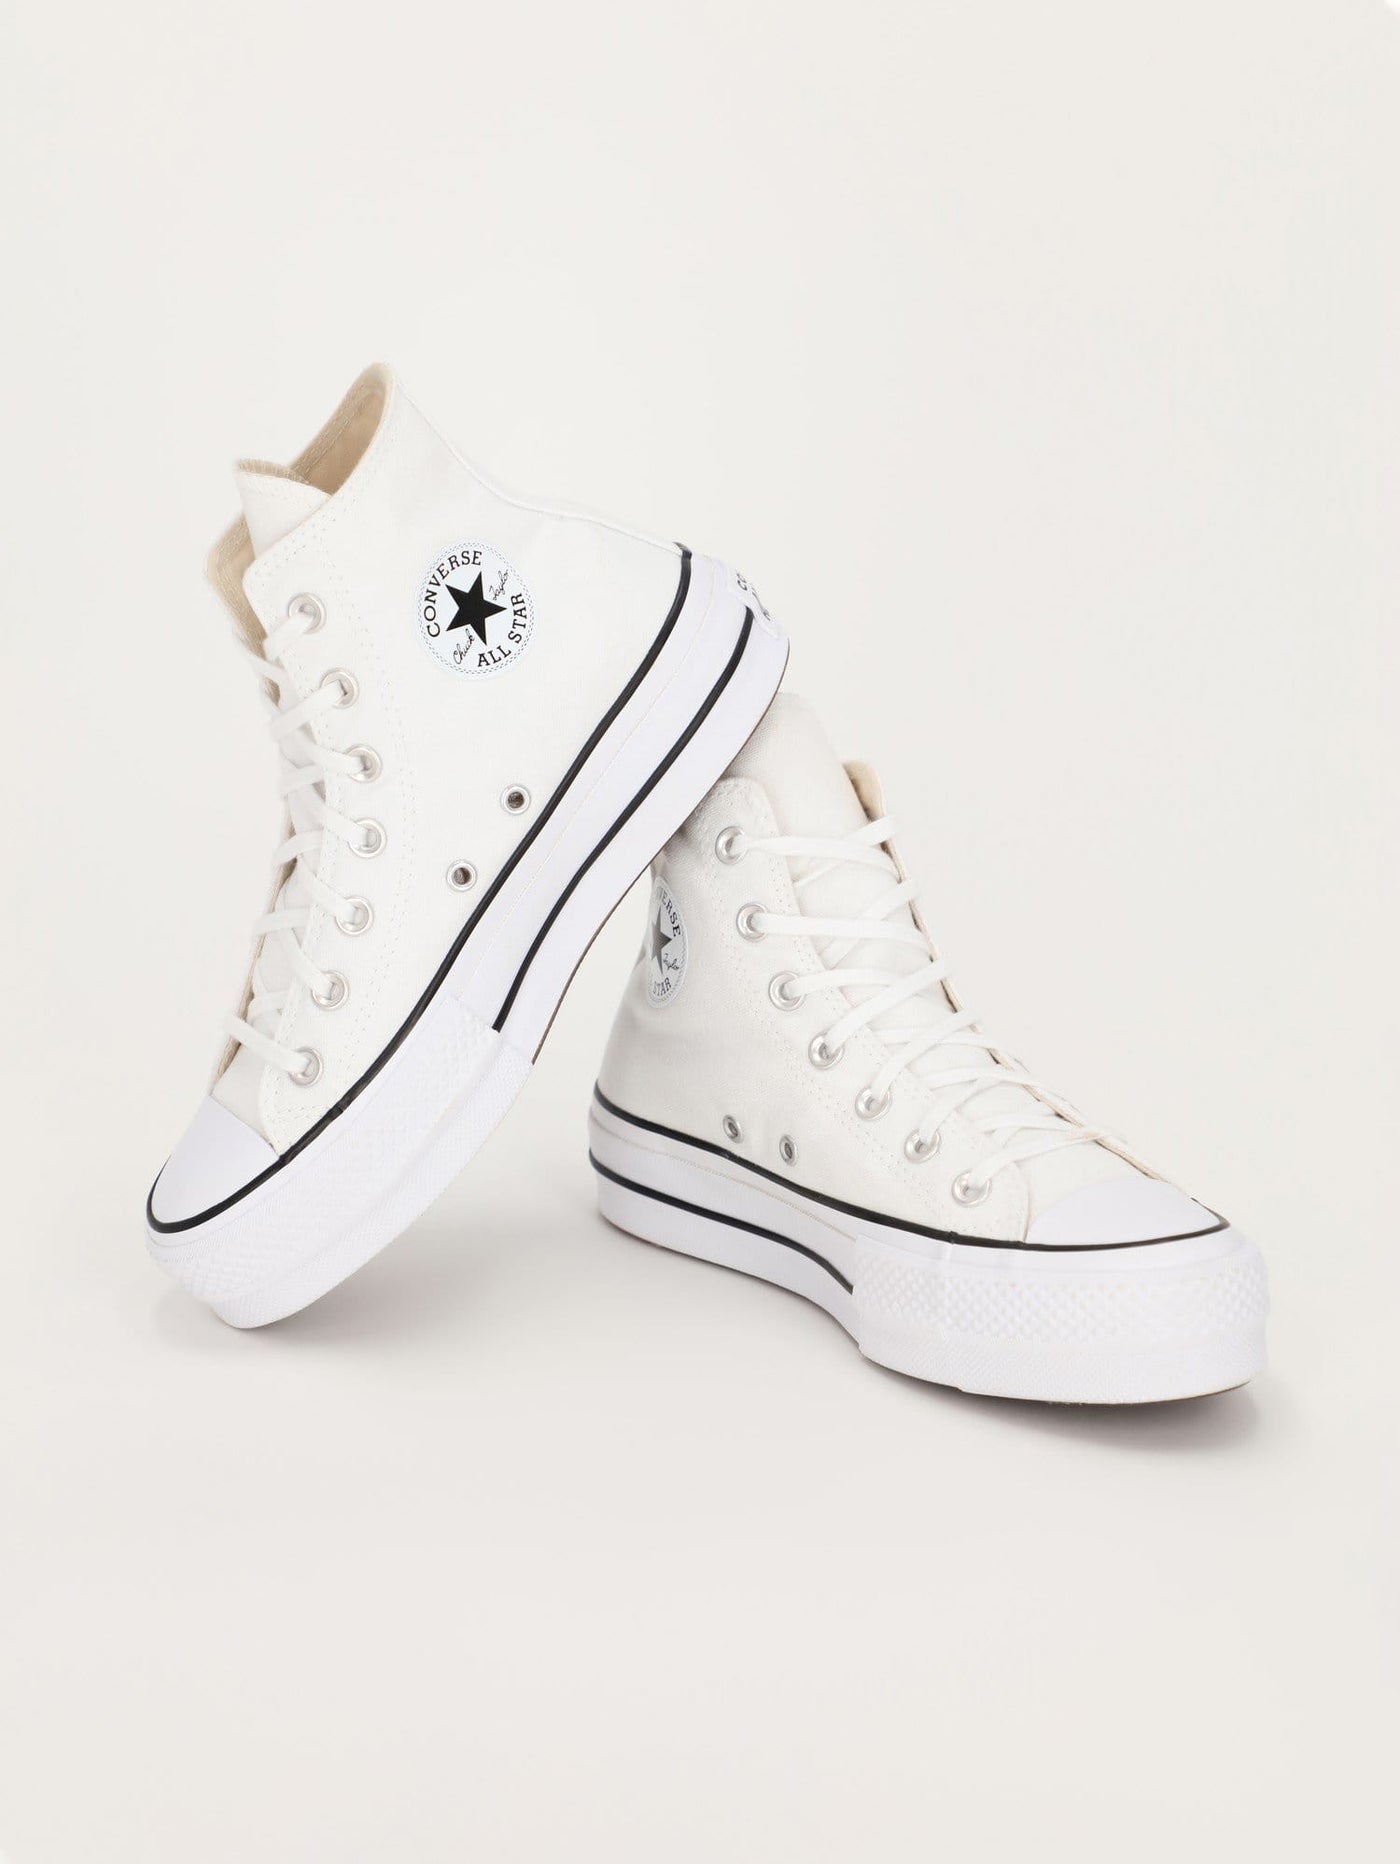 Converse Sneakers Optical White / 36 Converse Chuck Taylor All Star Lift Hi Sneakers - 560846C